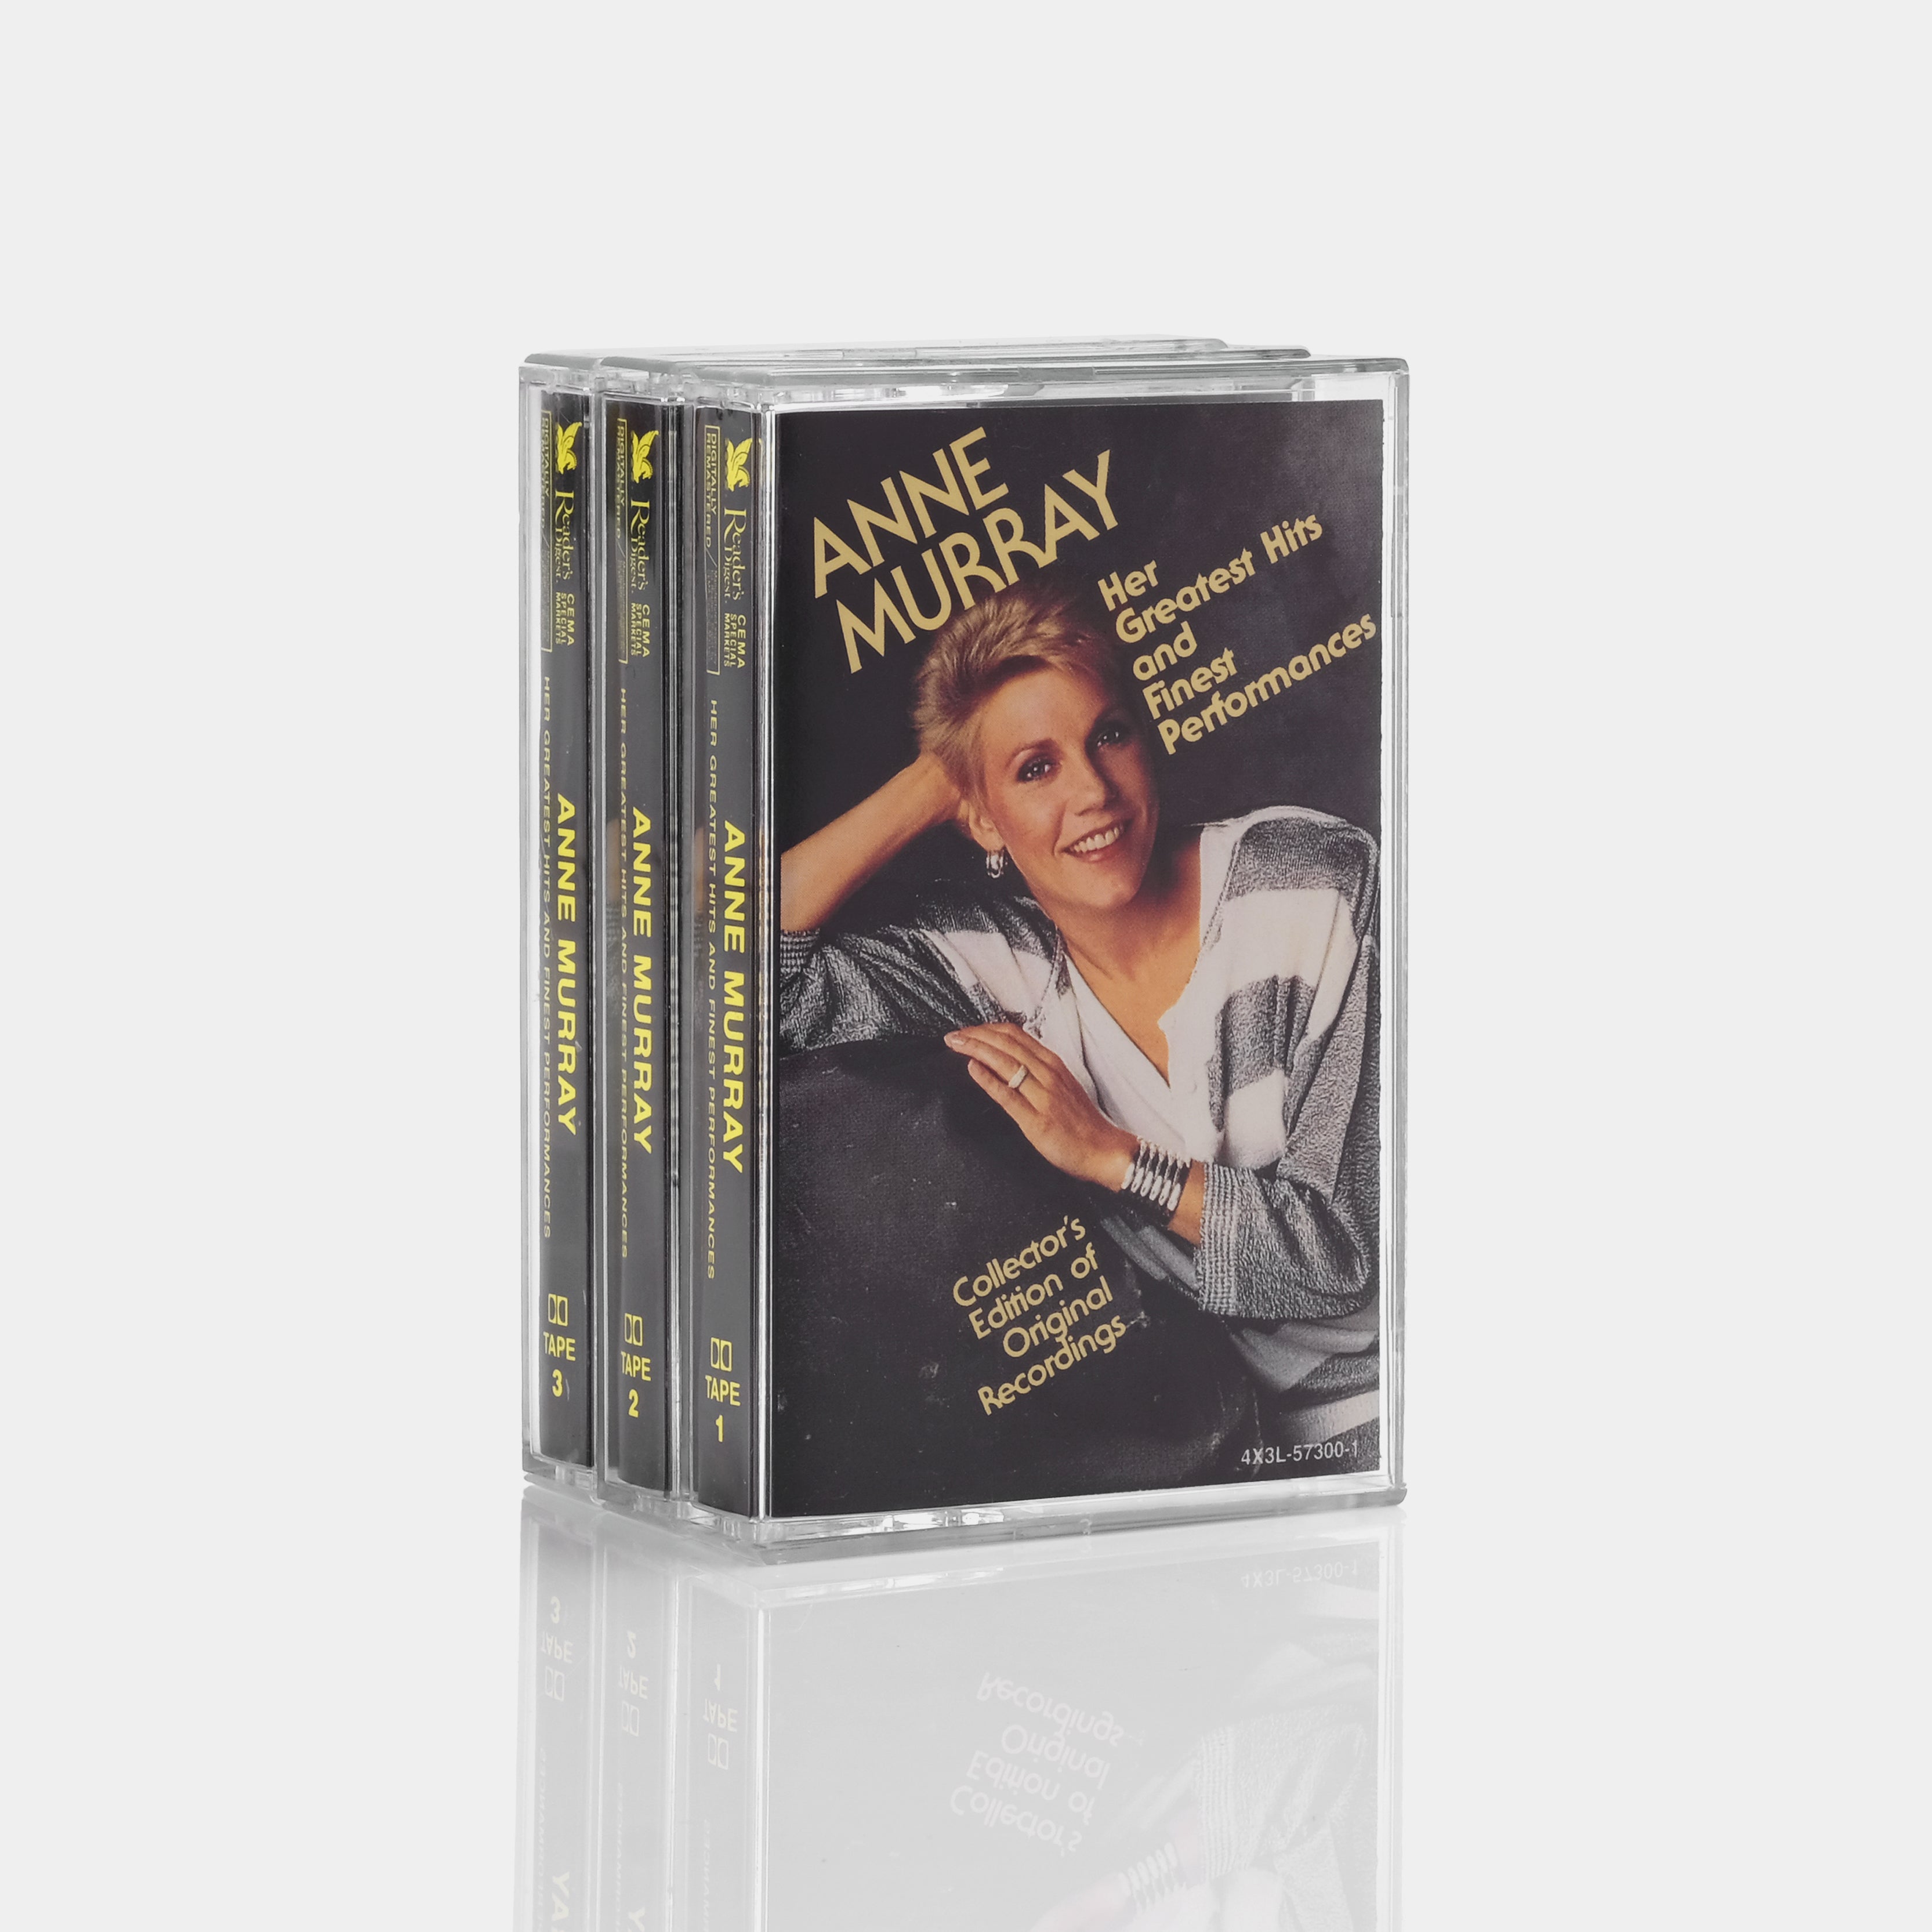 Anne Murray - Her Greatest Hits And Finest Performances Cassette Tape Set